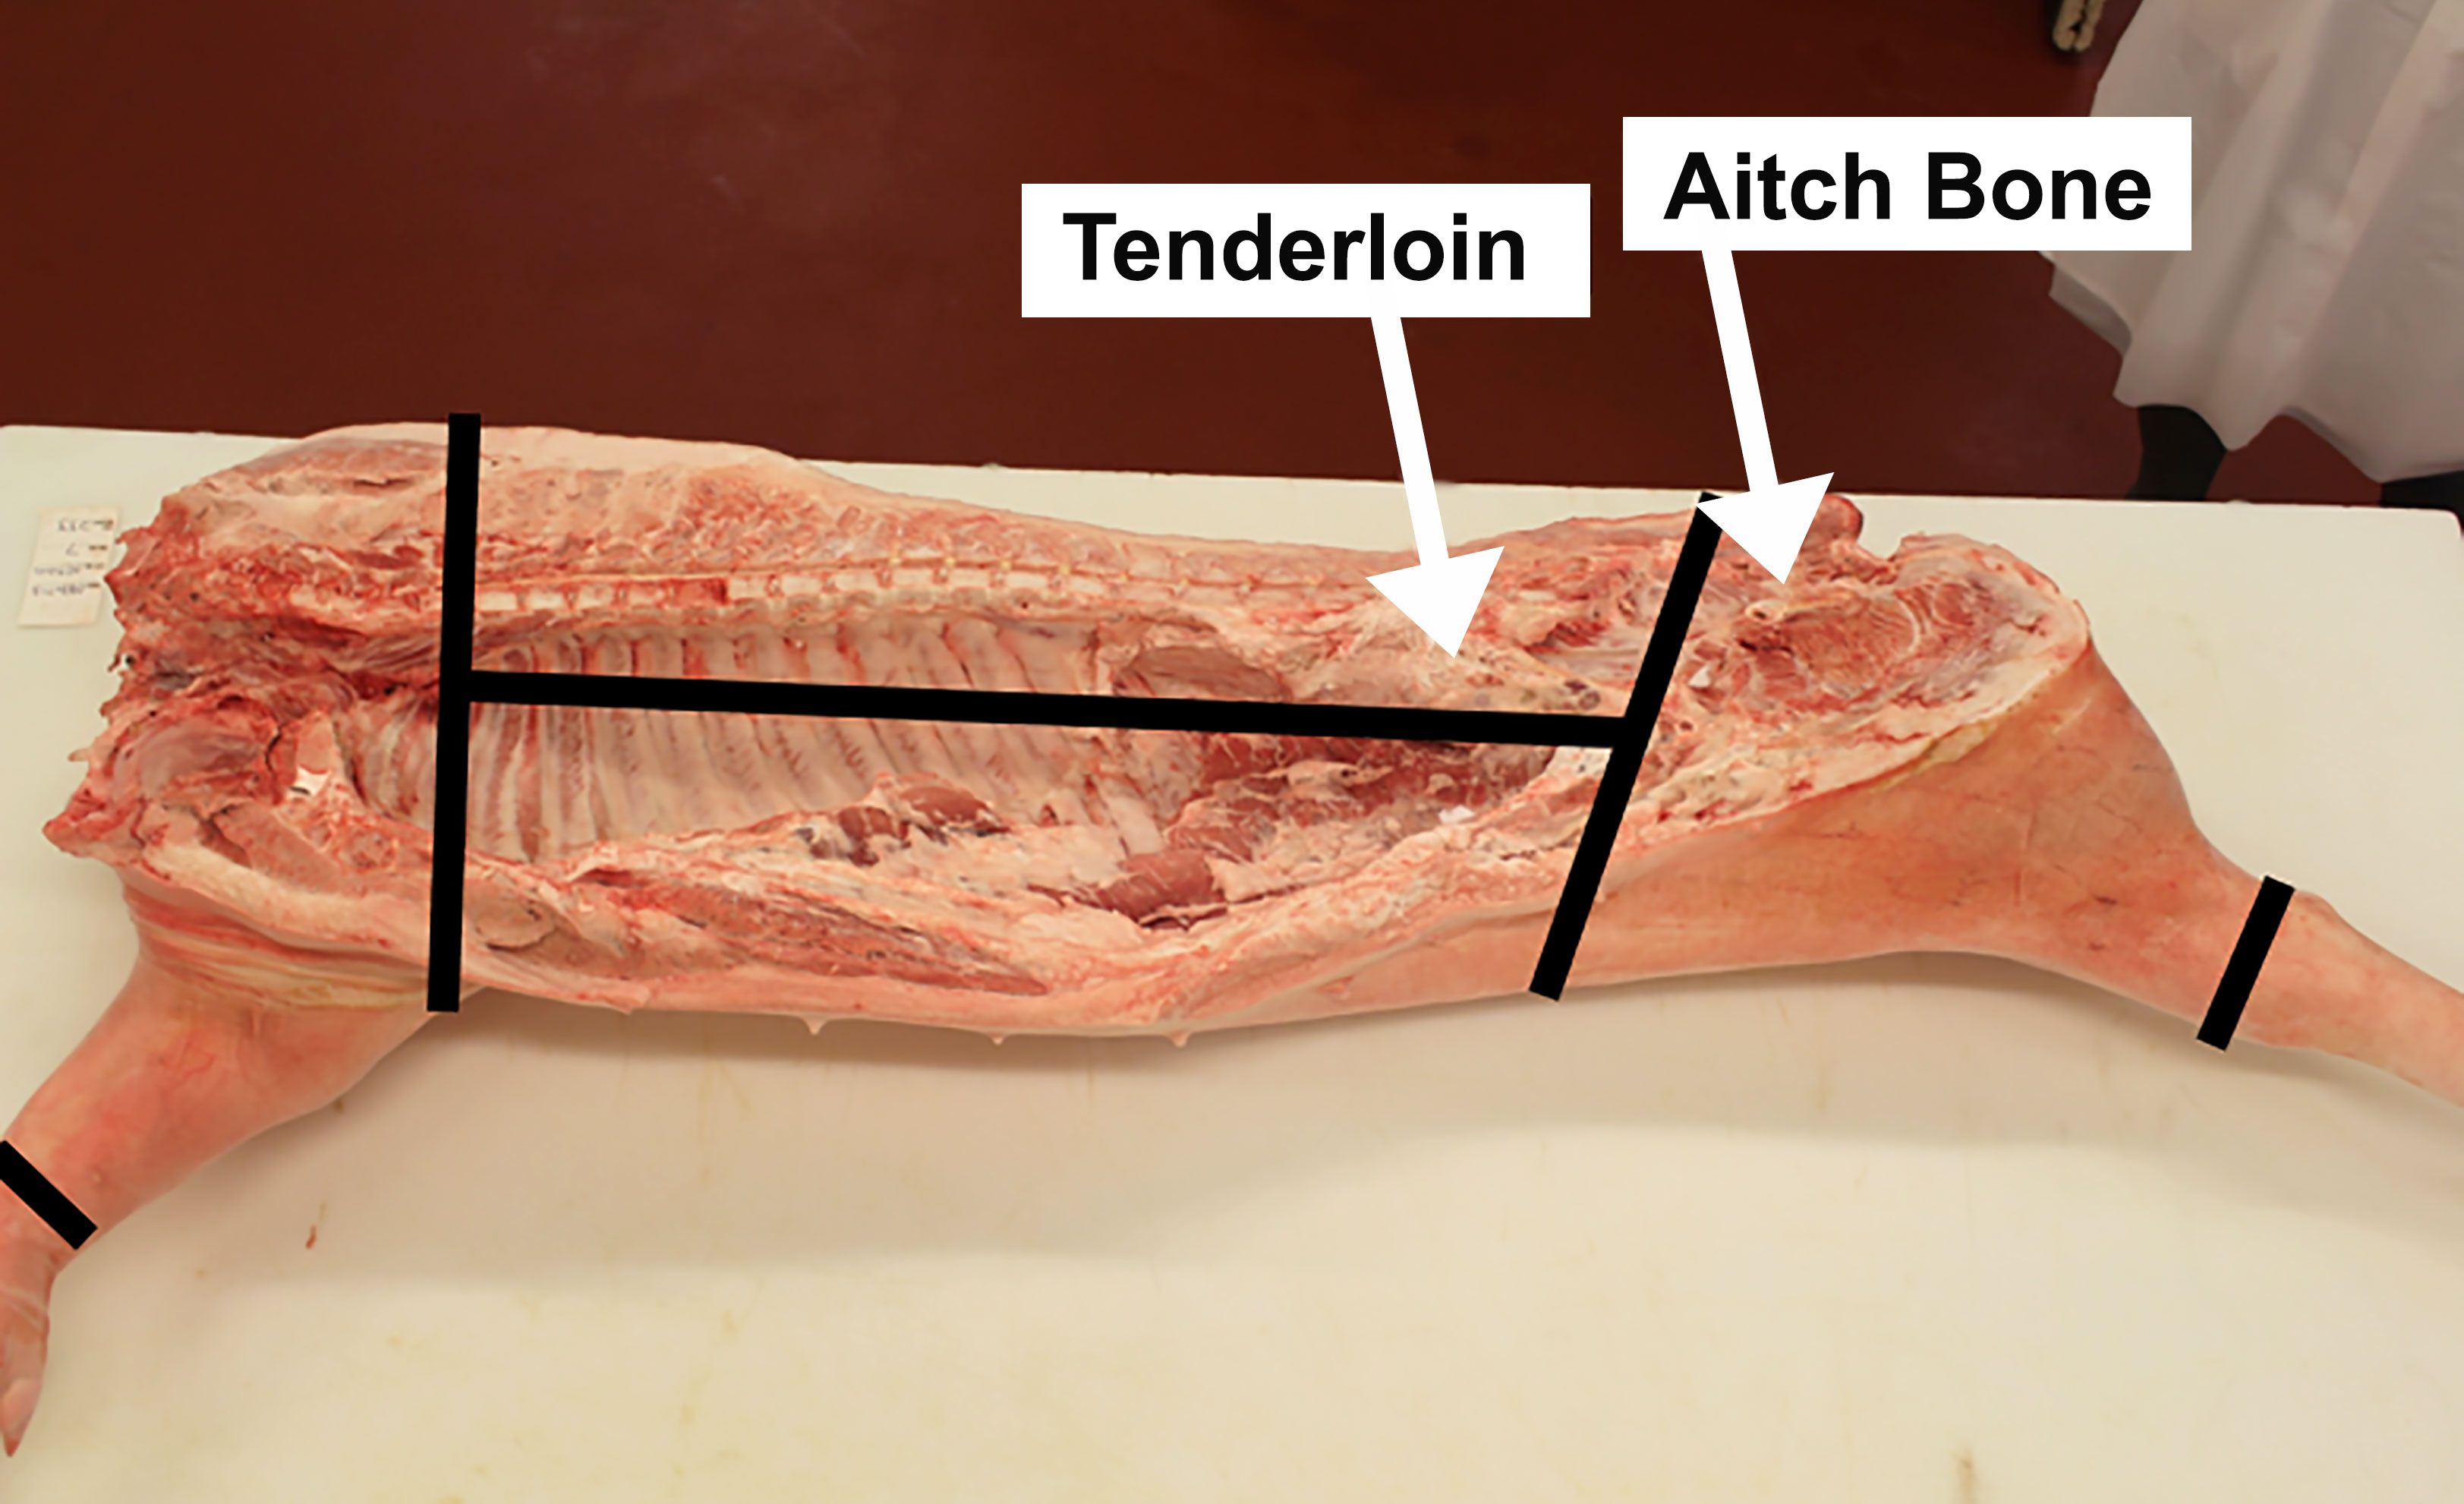 A pork carcass that has been cut in half. There are black lines demonstrating where to cut the carcass into its primal cuts. White arrows call out the tenderloin section and the aitch bone. For a complete description, contact SDSU Extension at: 605-688-4792